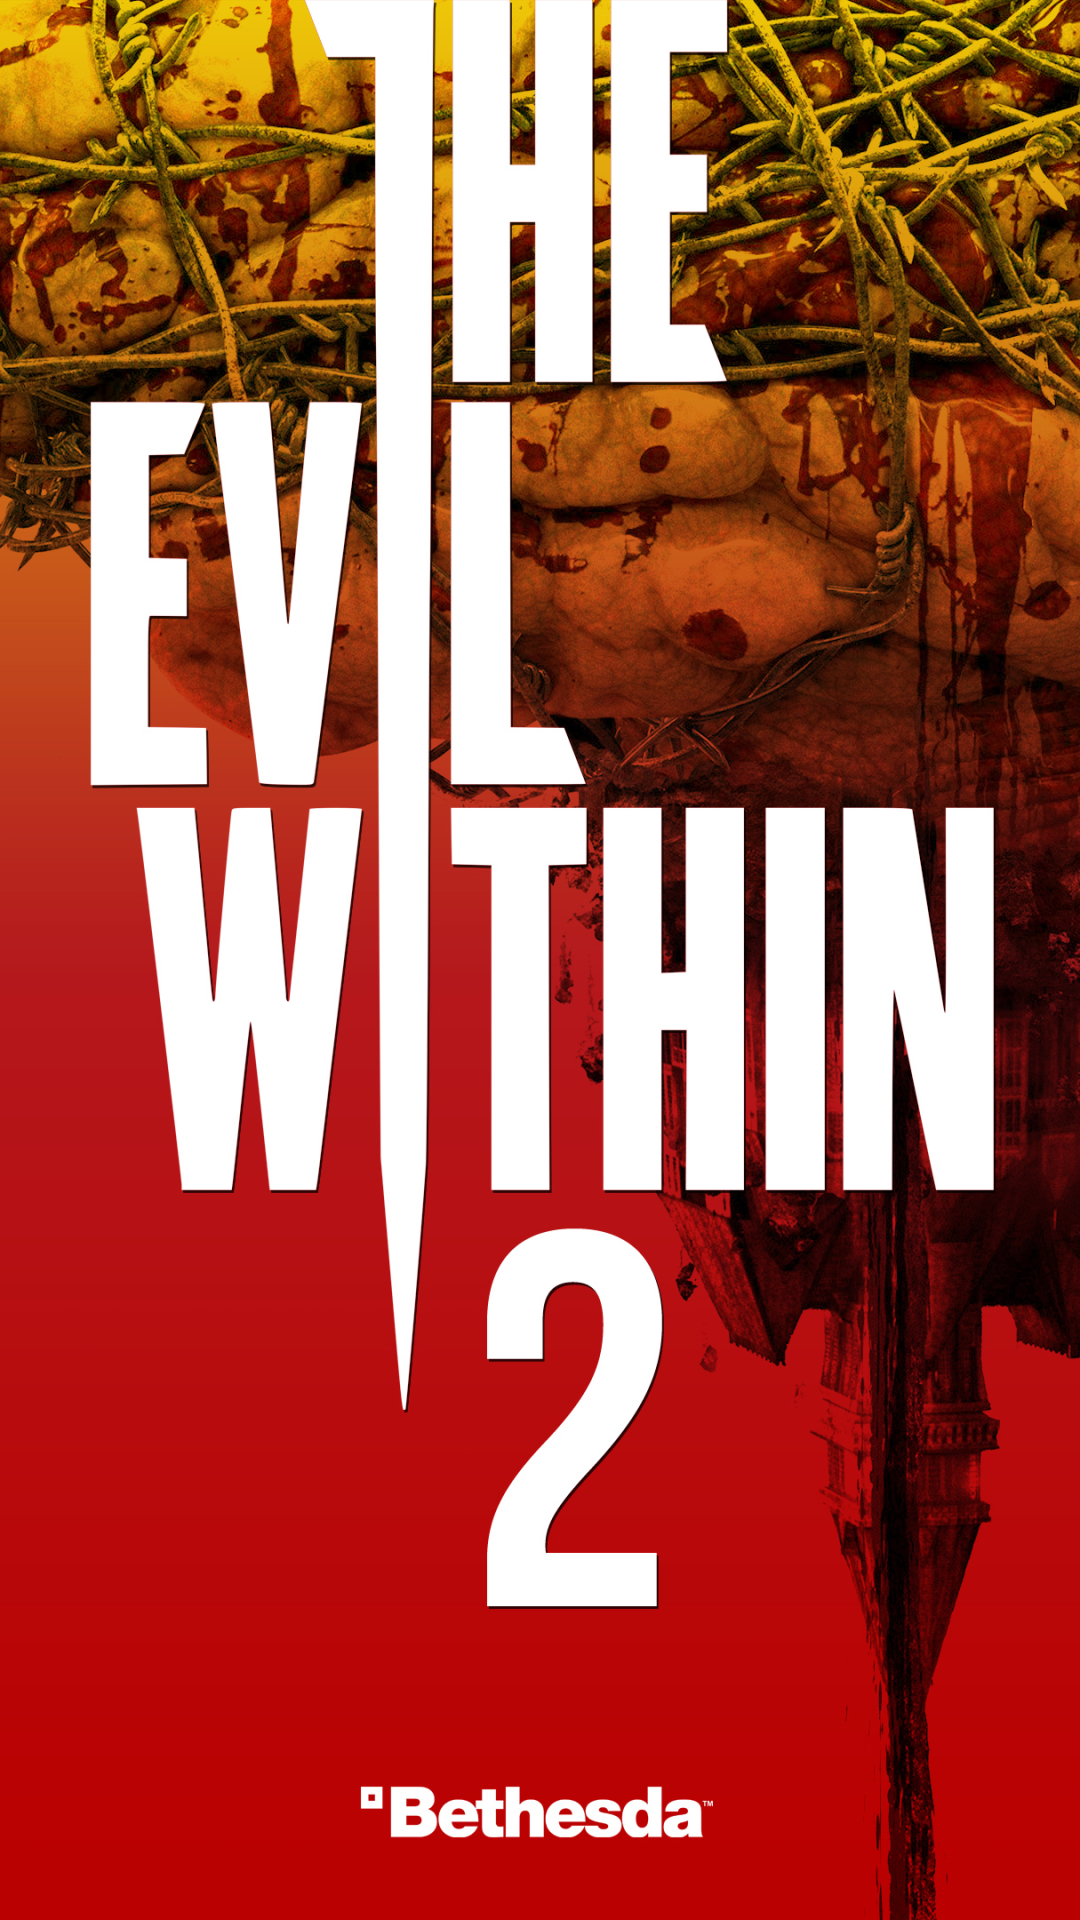 video game, the evil within 2 wallpaper for mobile